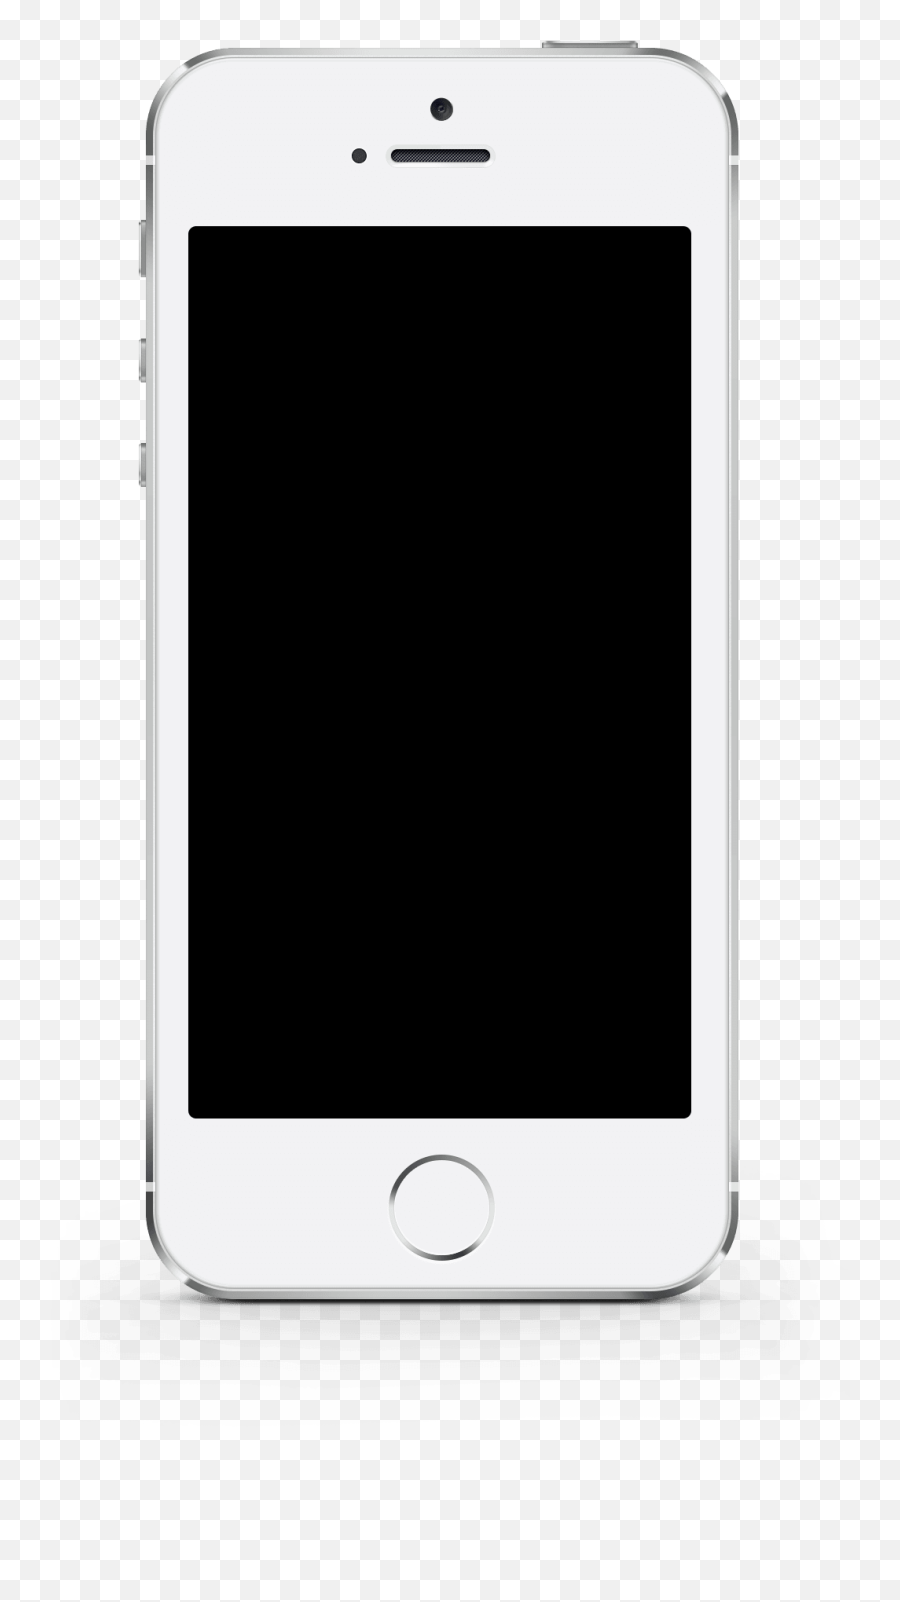 Mobile Free Download Png Images Classic Mobile Mobile - Transparent Iphone Overlay Png Emoji,Phone Transparent Background